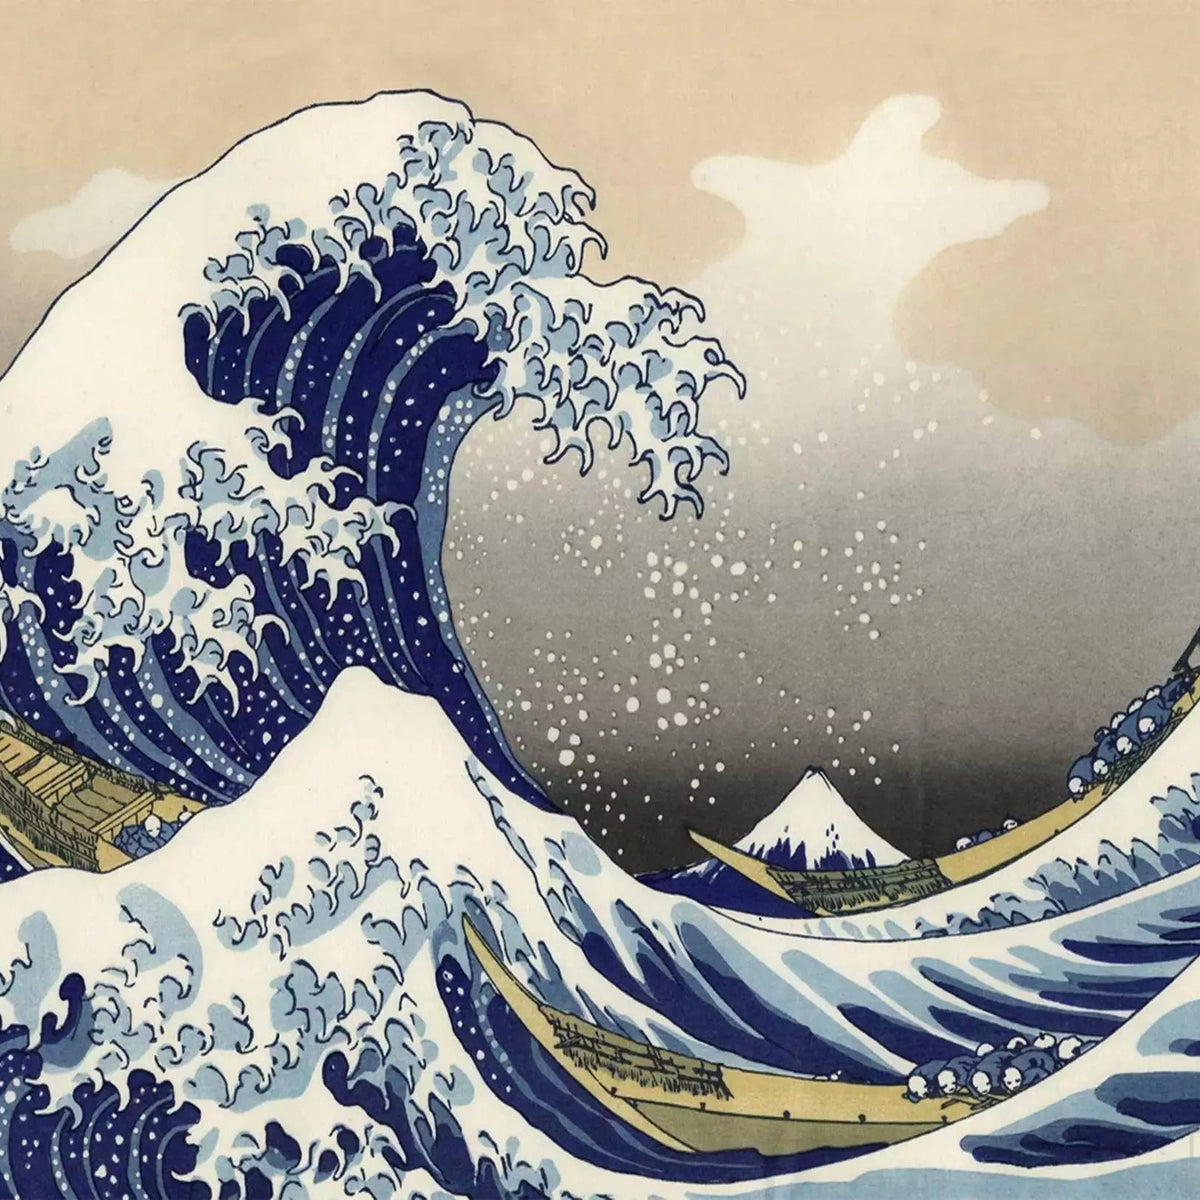 The Great Wave - Diamond Painting-Diamond Painting-16"x20" (40x50cm)-Canvas by Numbers US